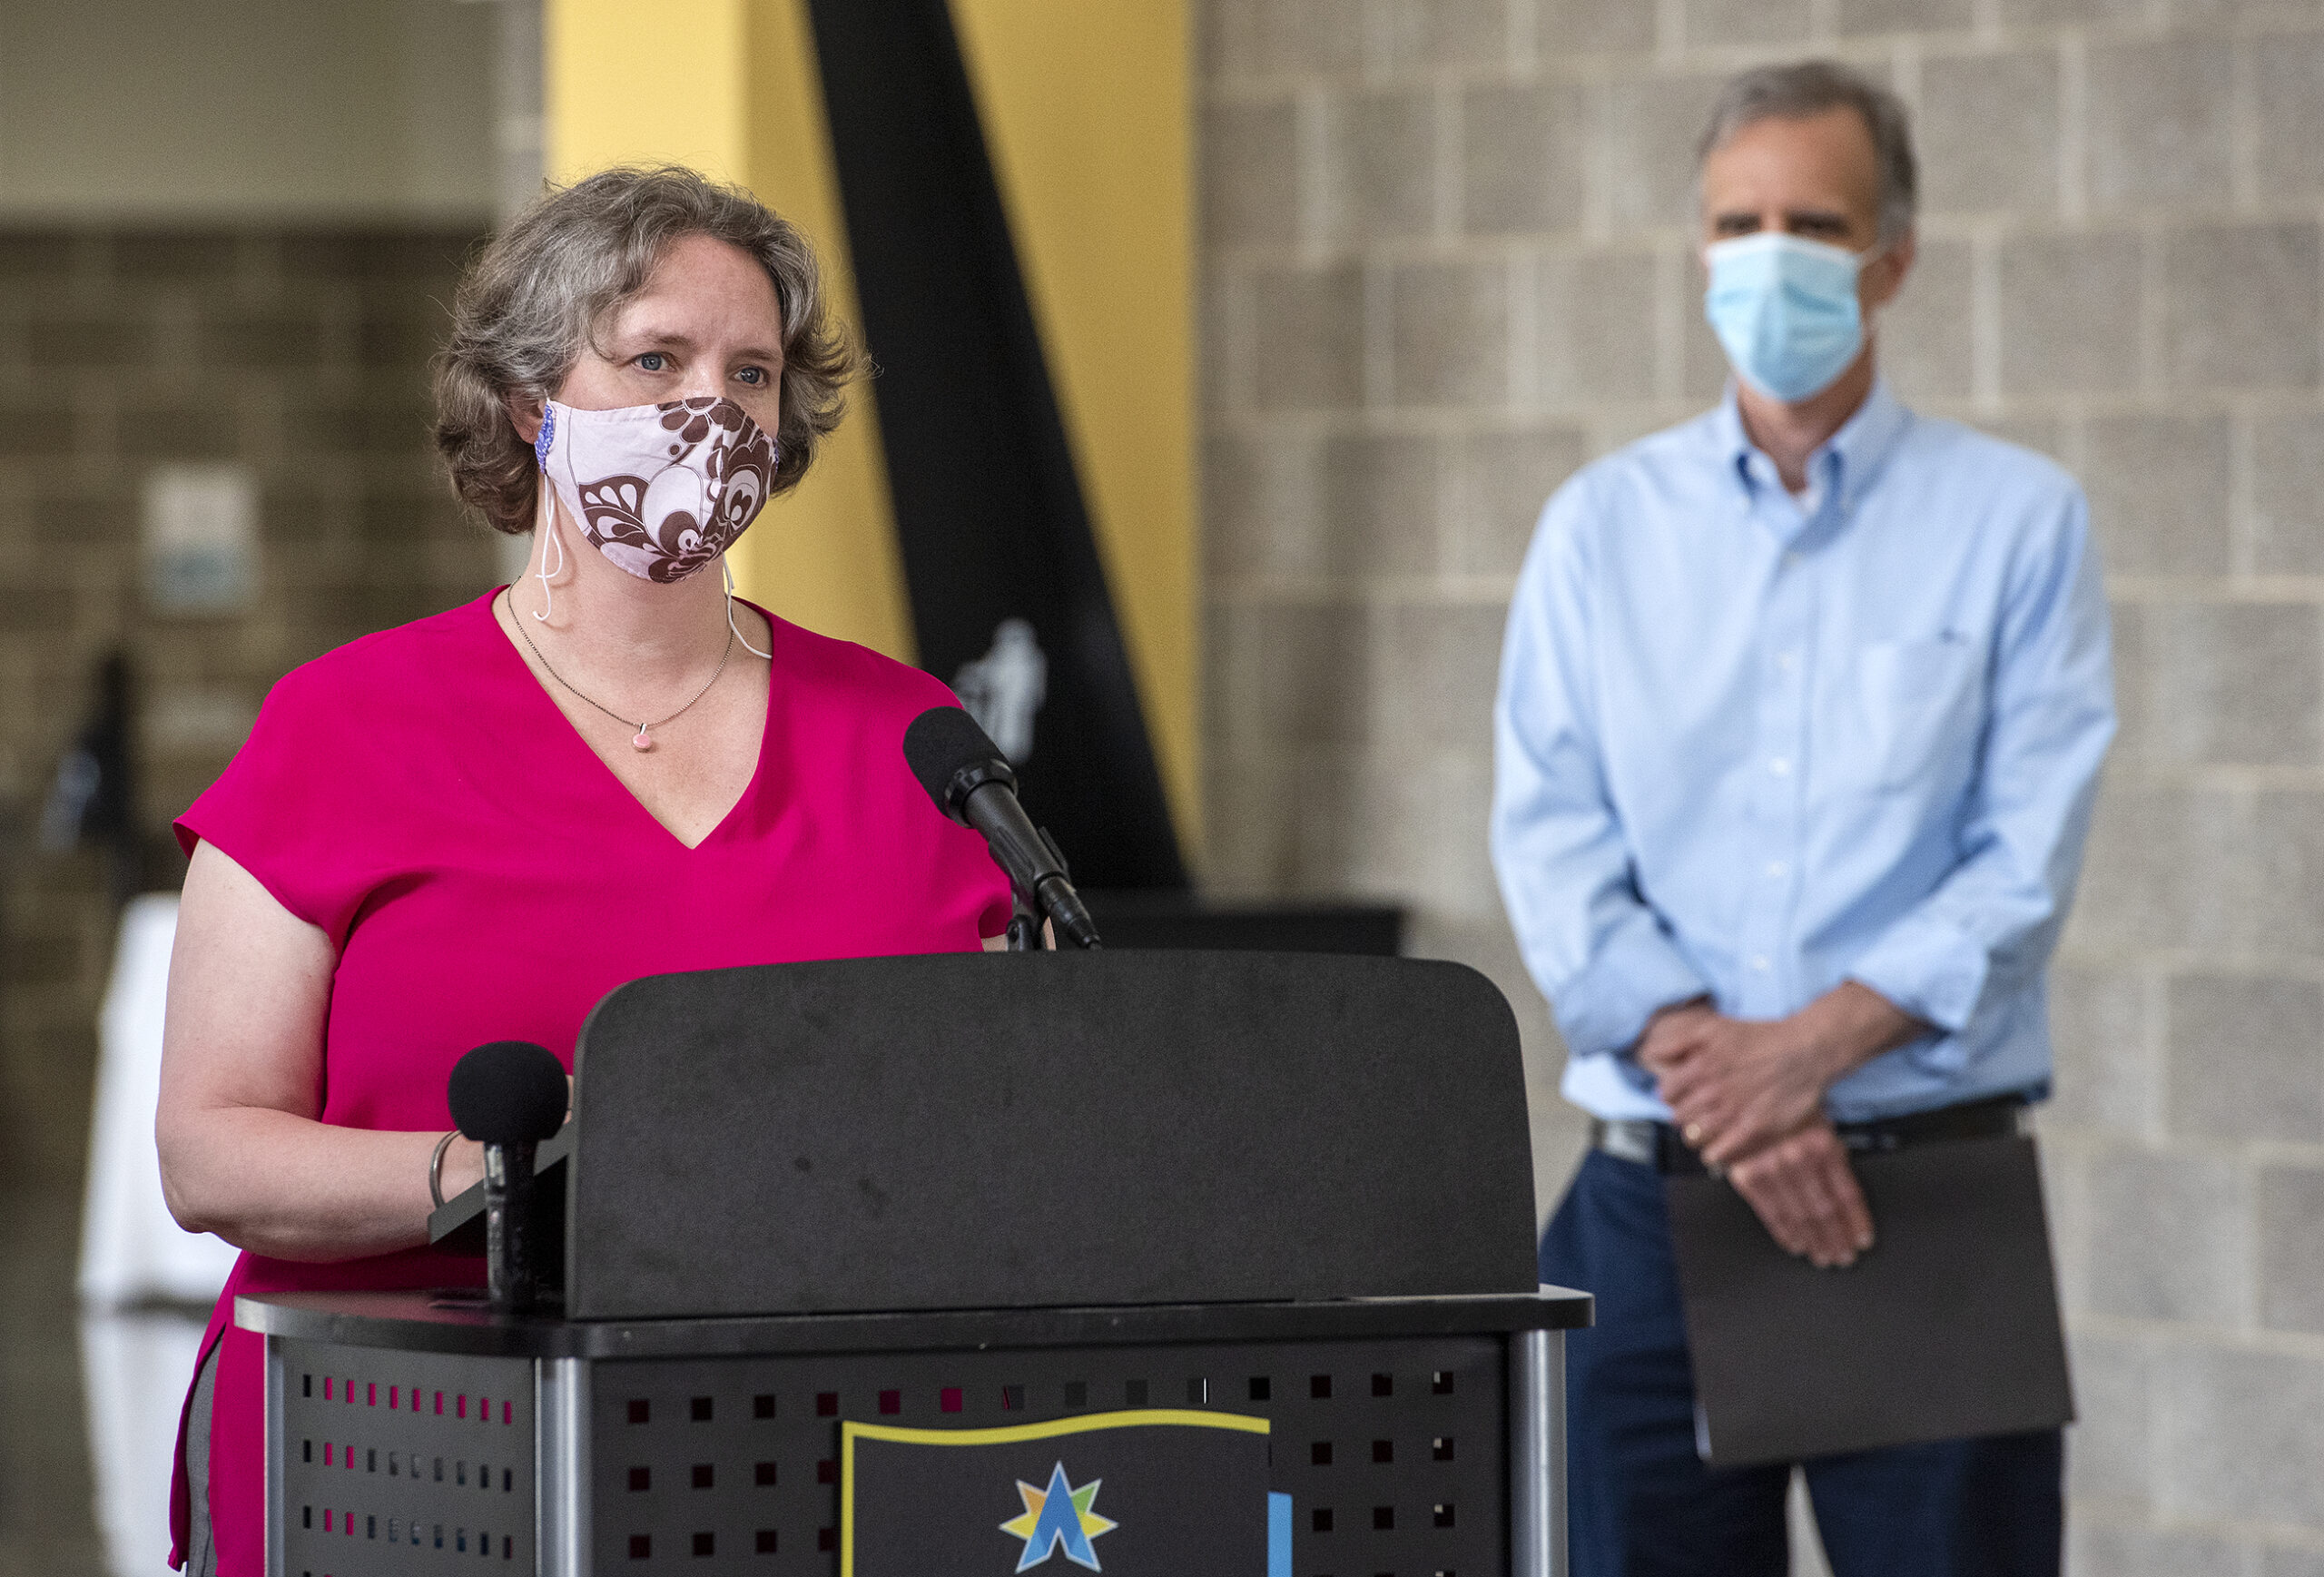 Satya Rhodes-Conway wears a mask while speaking at a podium. Joe Parisi stands off to the side, also in a face mask.